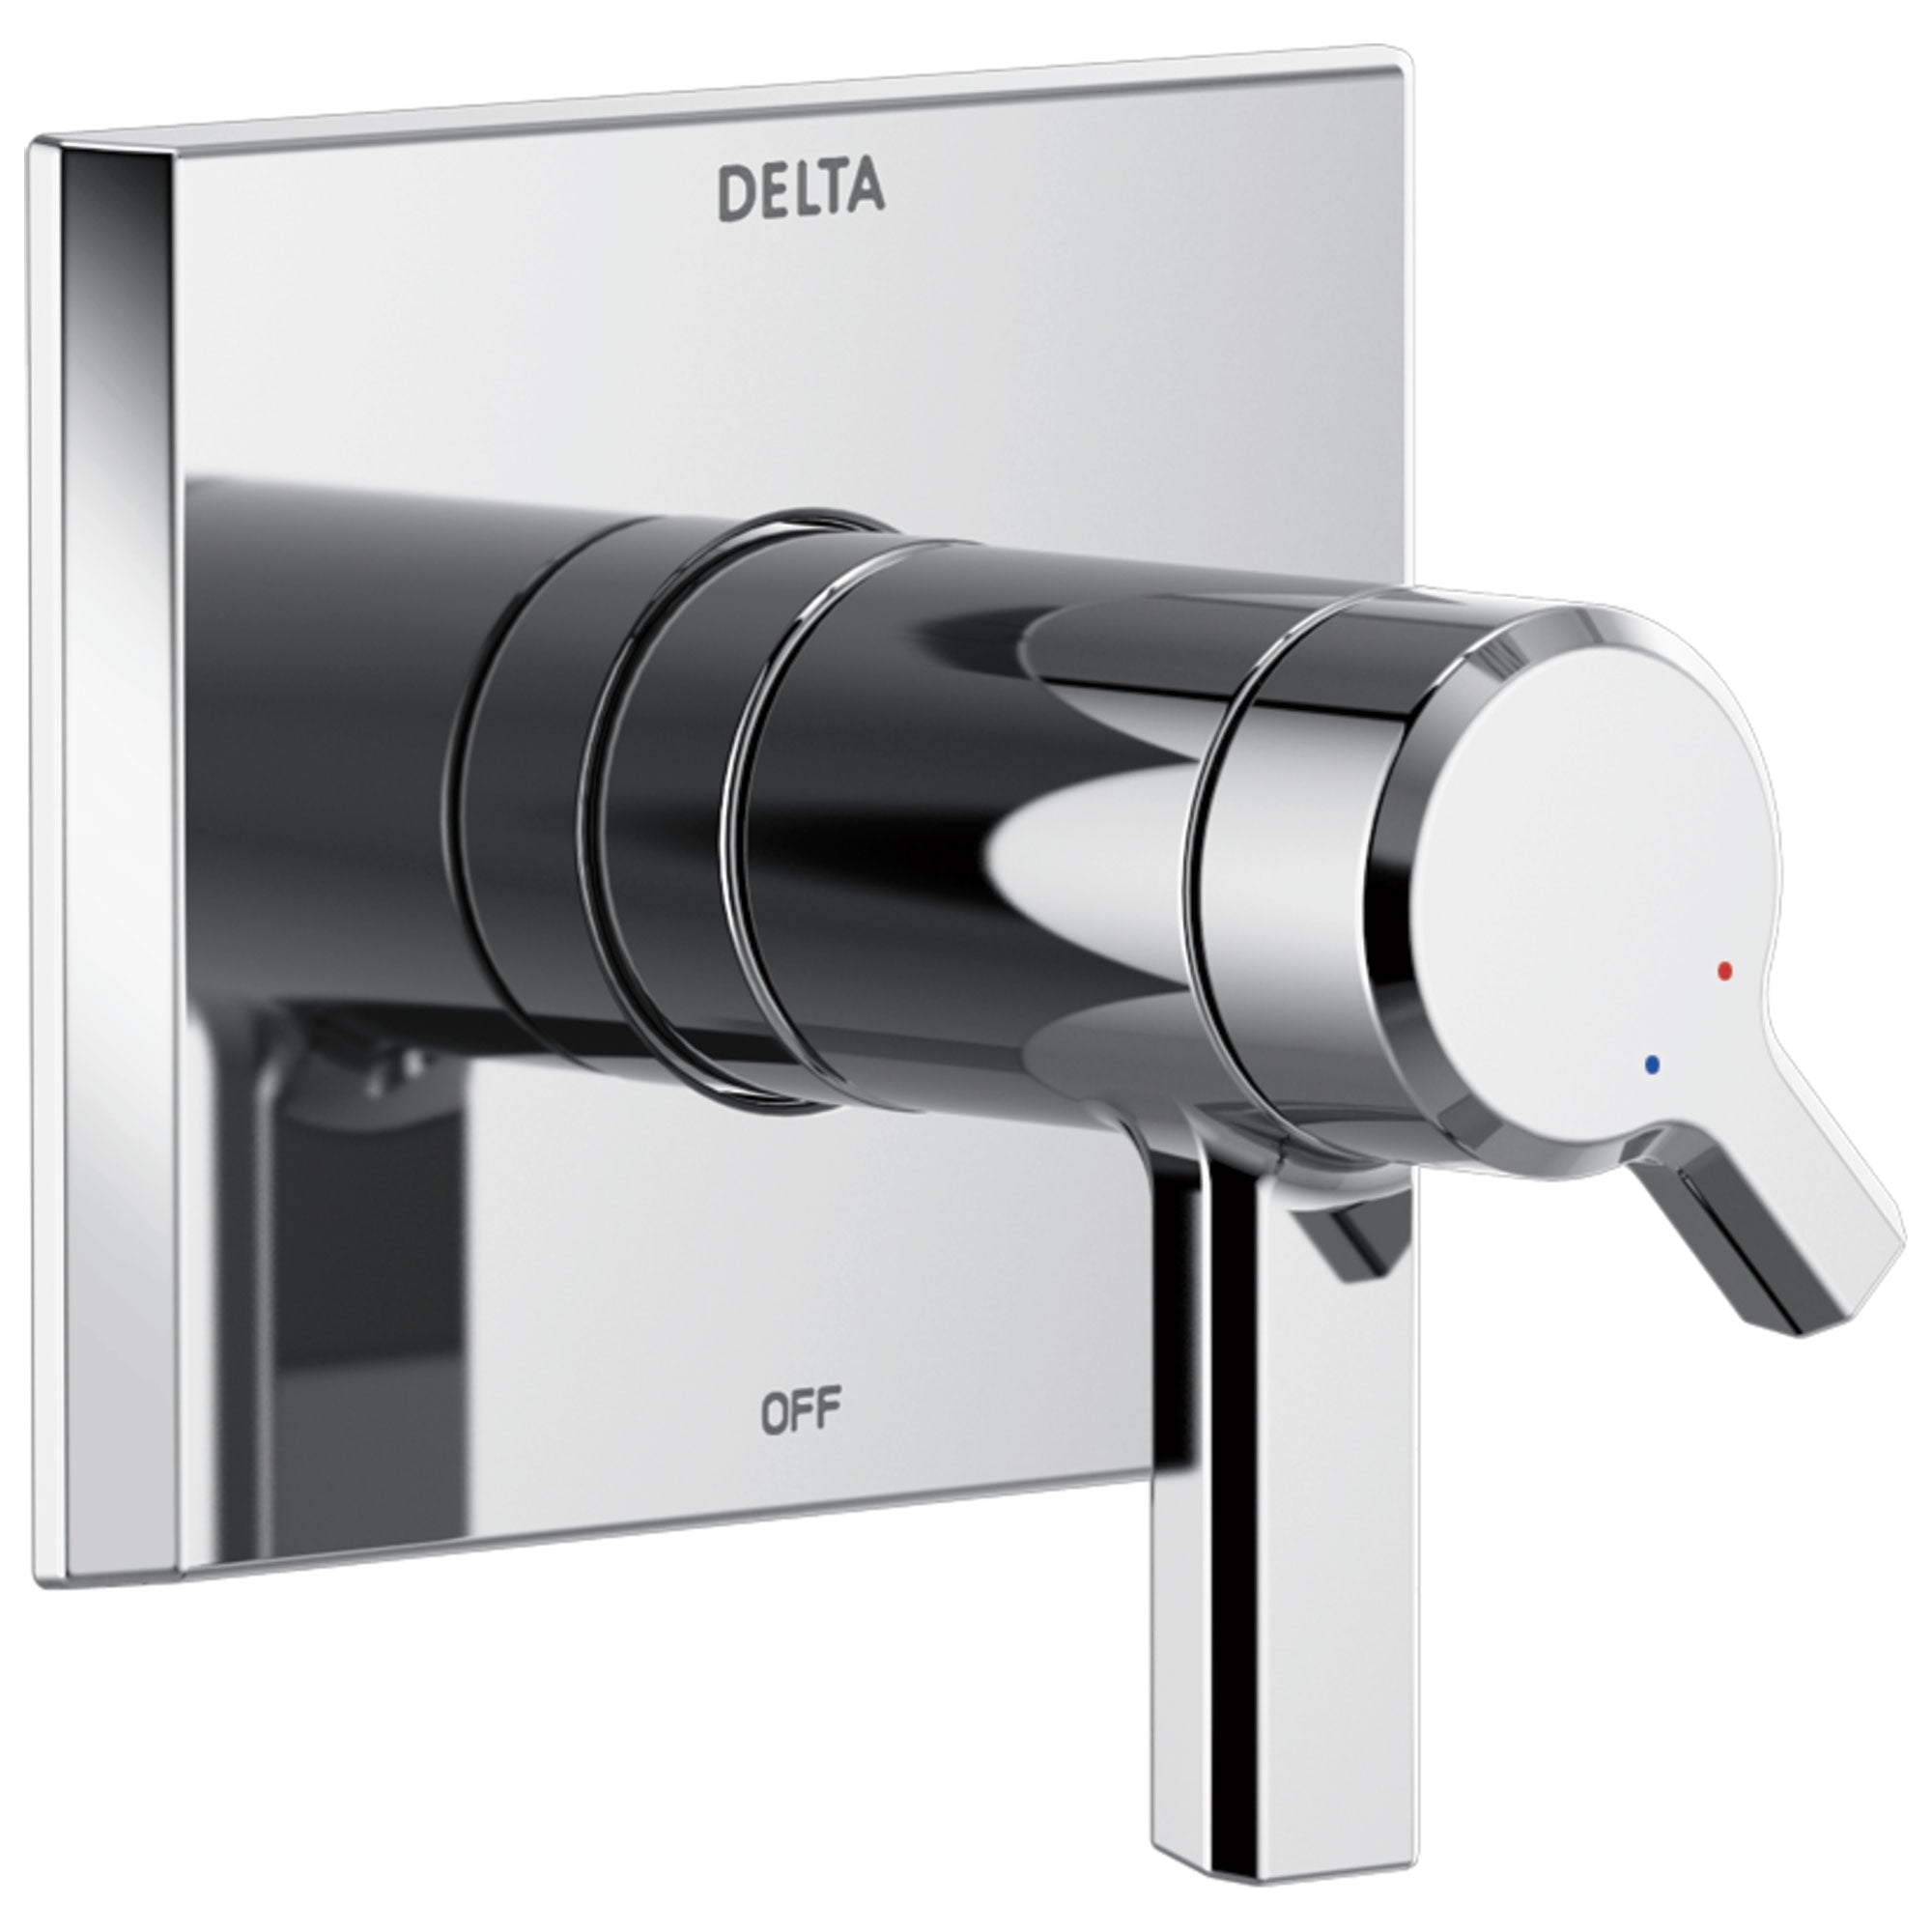 Delta Pivotal Chrome Finish Thermostatic Shower Faucet Dual Handle Control Includes 17T Cartridge, Handles, and Valve with Stops D3308V